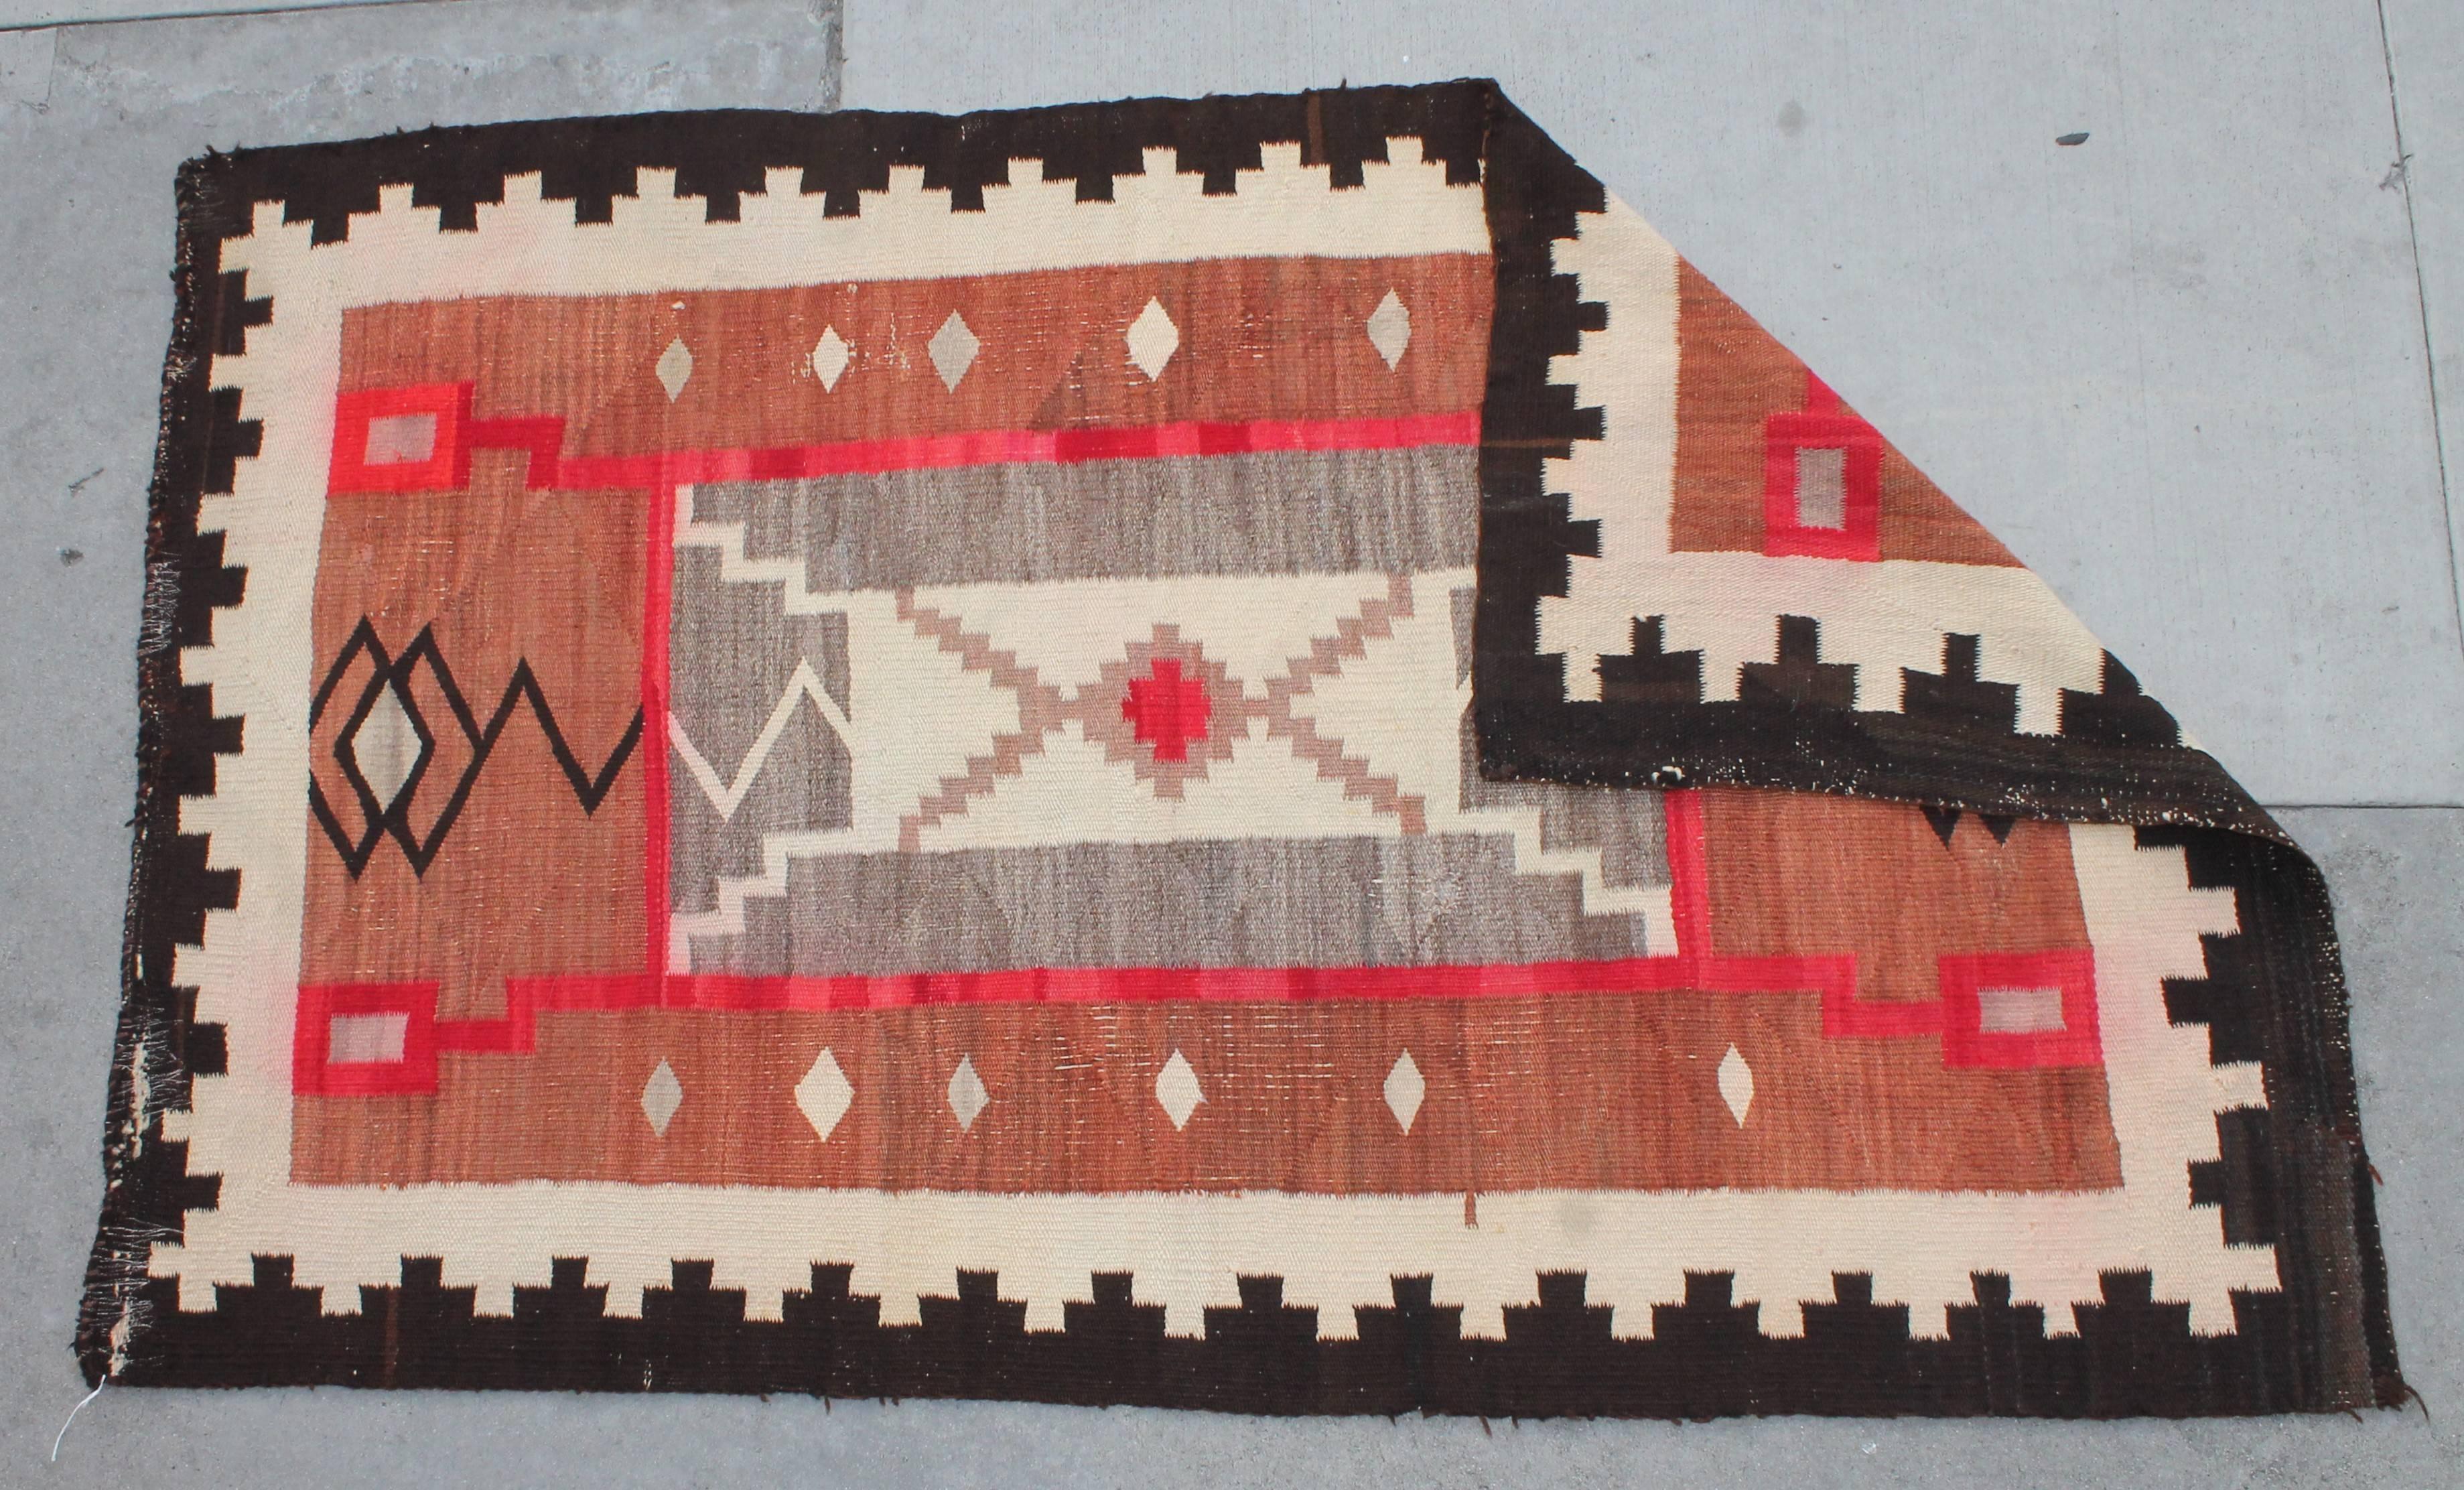 19th century Navajo Indian storm pattern weaving or rug in fantastic faded colors. Minor edging issues or wear. This is a wonderful aged weaving with great colors and pattern.